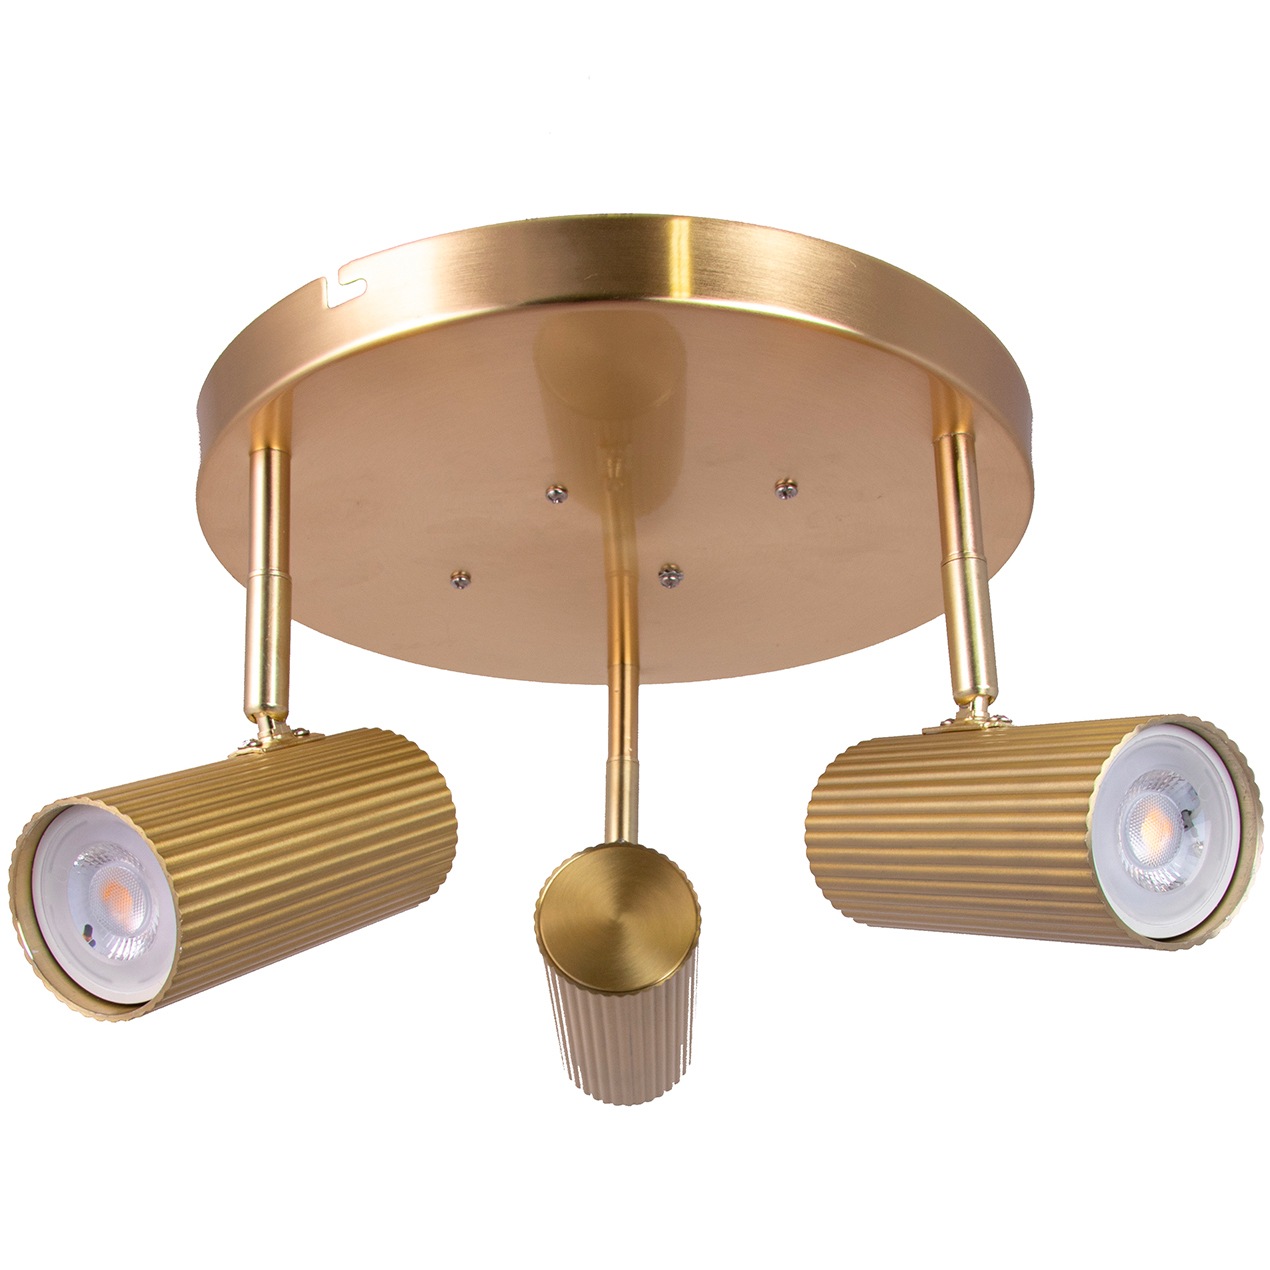 Hubble 3 Ceiling Fixture, Brushed brass